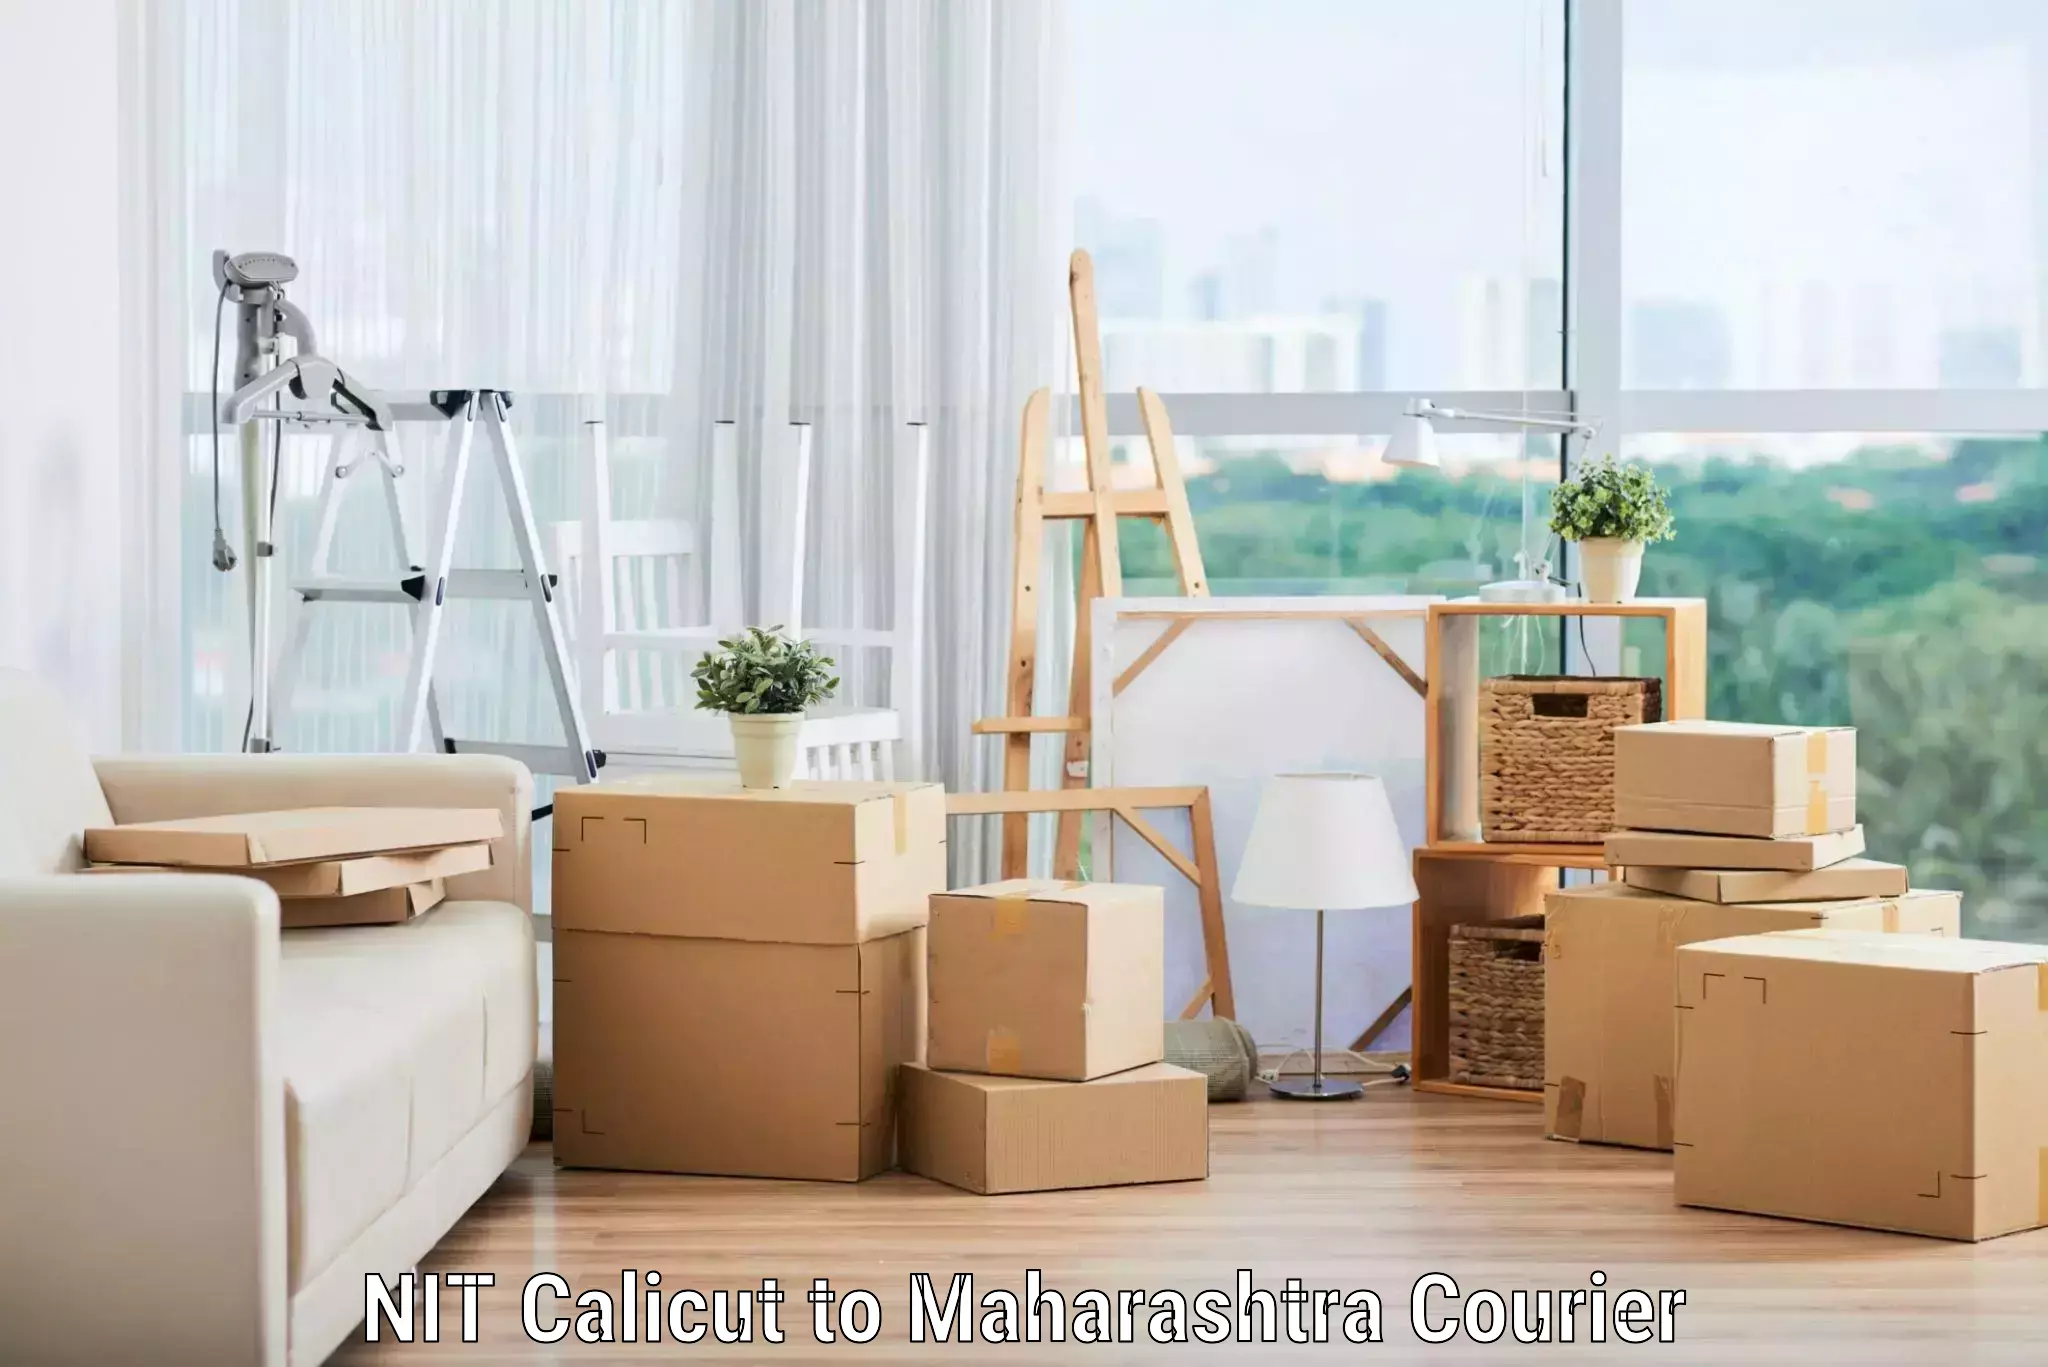 Trusted moving company NIT Calicut to Paithan